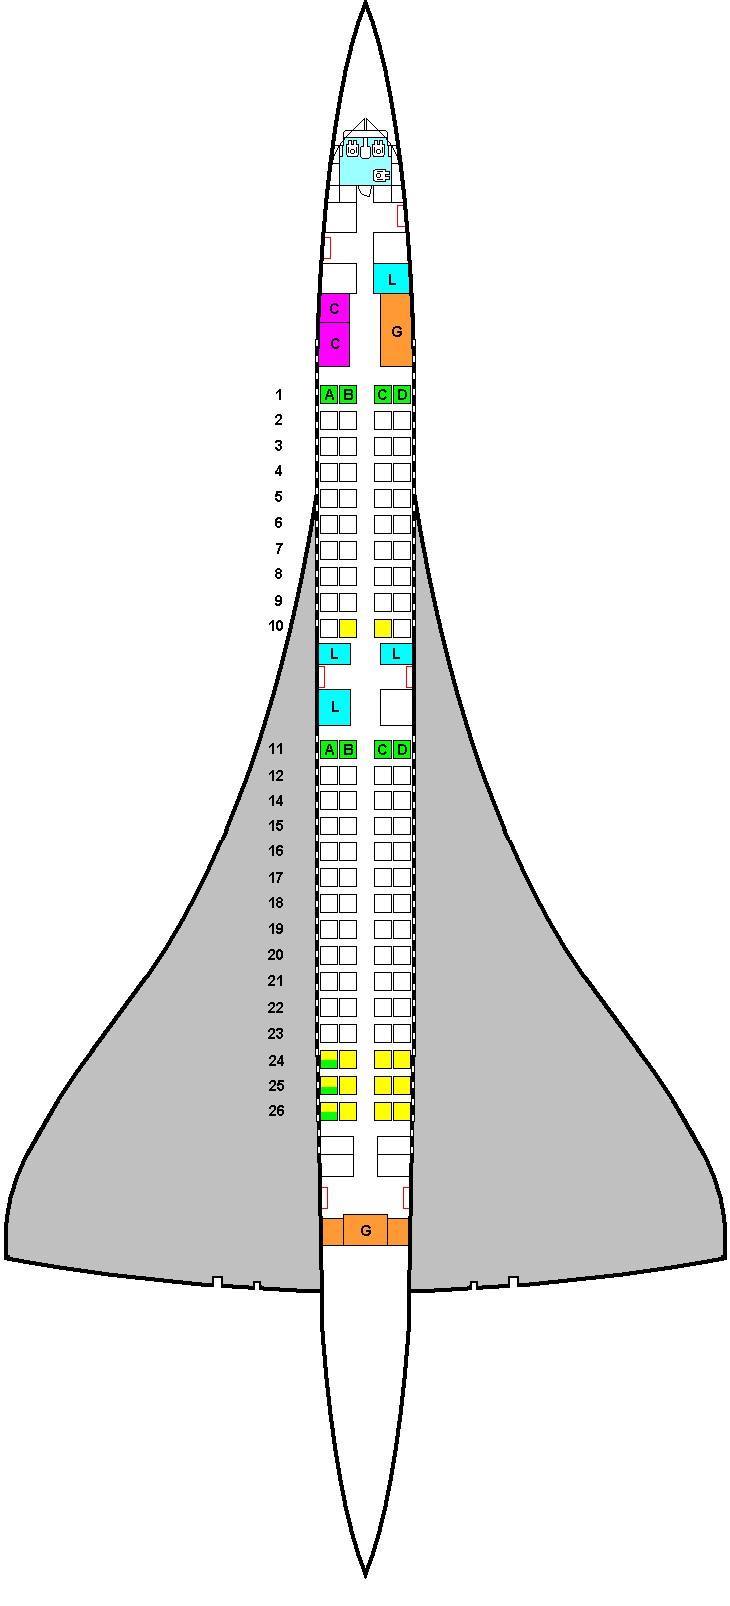 Concorde Seating Chart